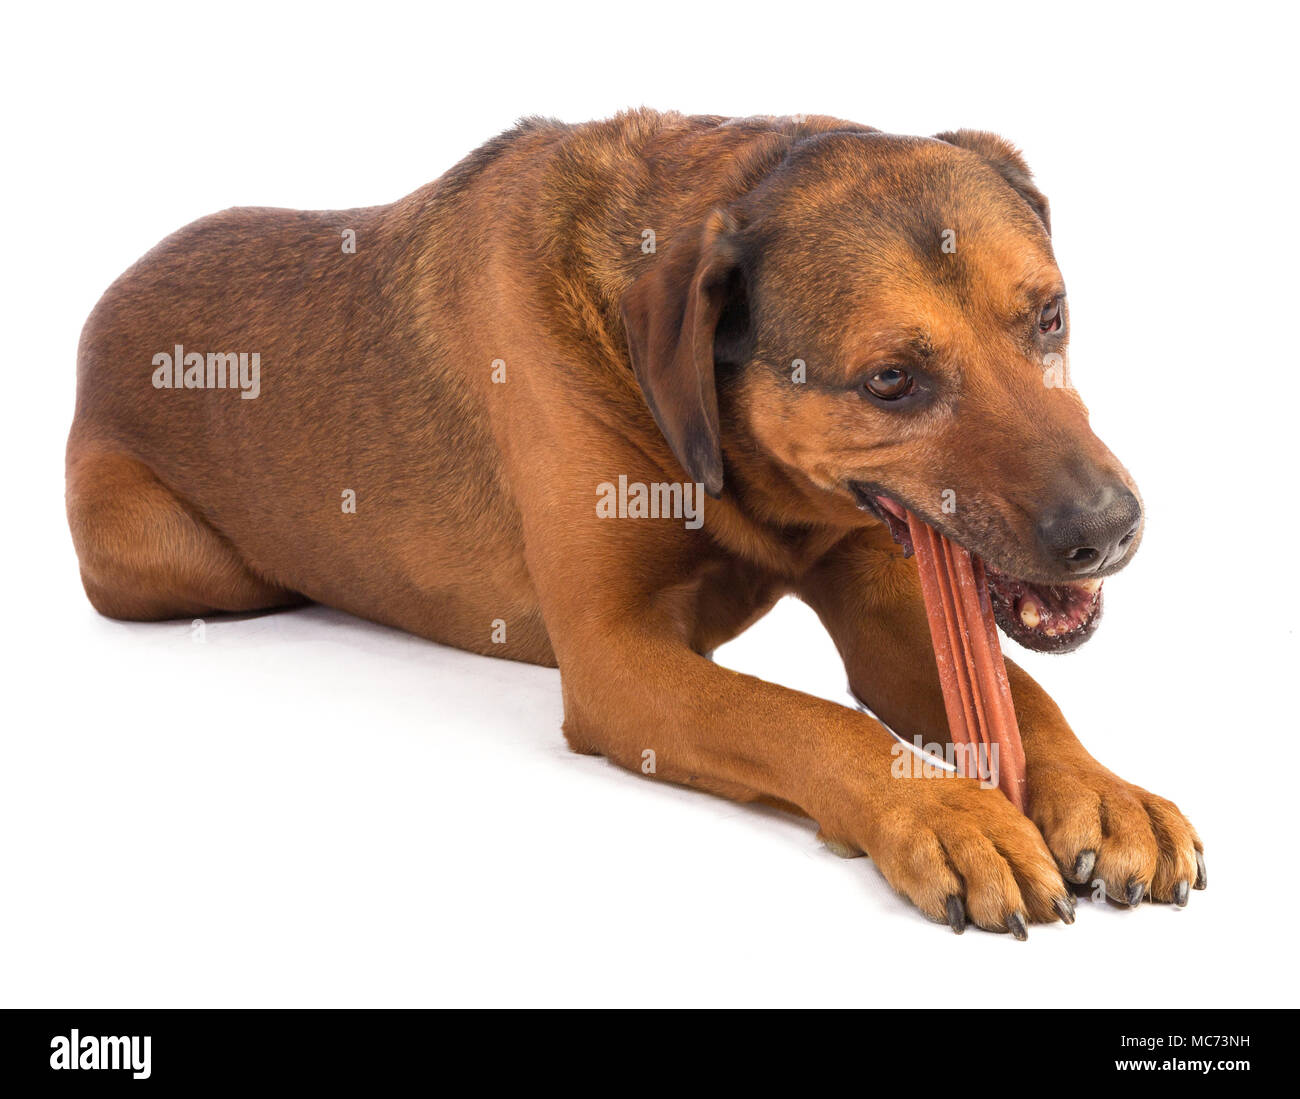 Large Brown Dog With Short Hair Eating A Stick To Chew On White Background Stock Photo Alamy